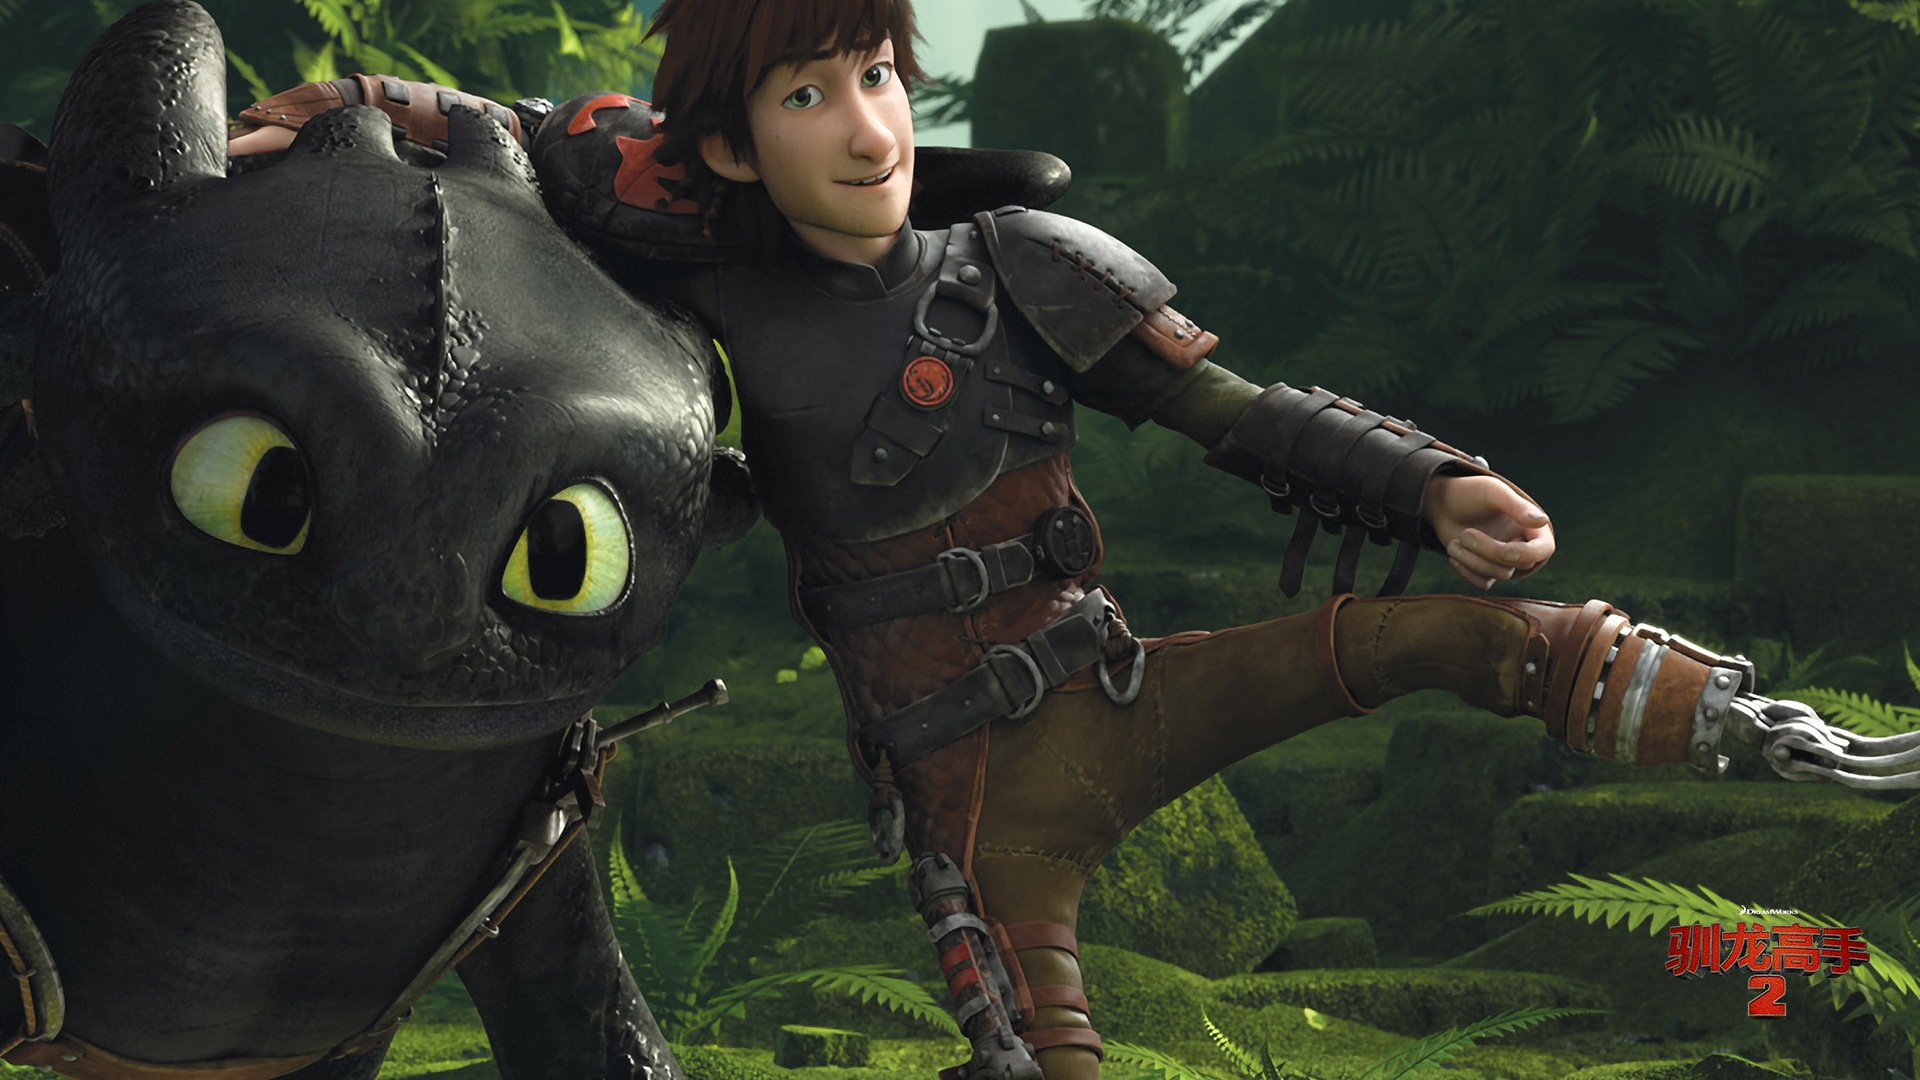 How to Train Your Dragon 2 驯龙高手2 高清壁纸3 - 1920x1080